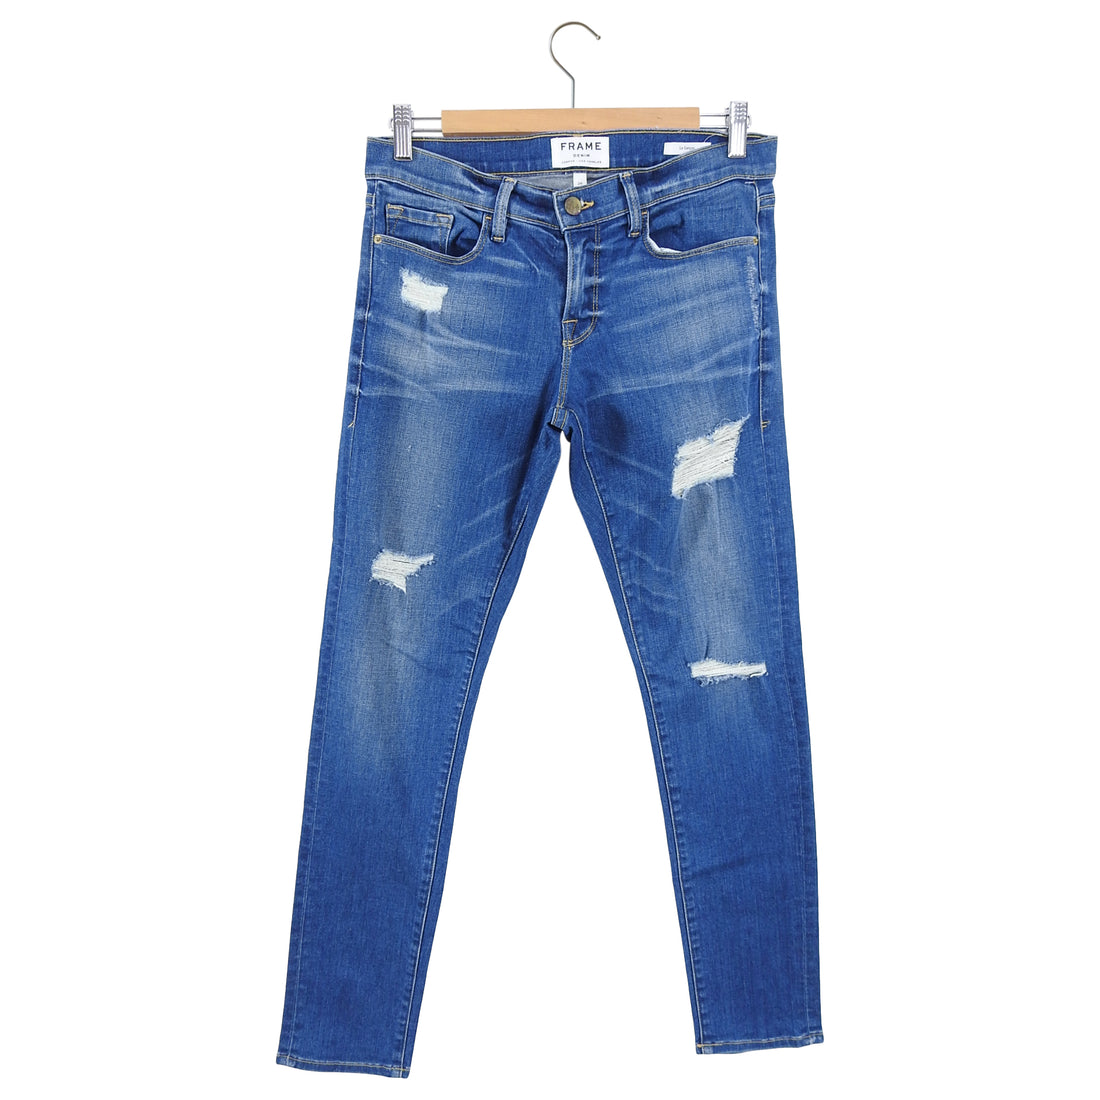 Frame Denim Le Garcon Skinny Low Rise Distressed in Blue Jay Way - 26